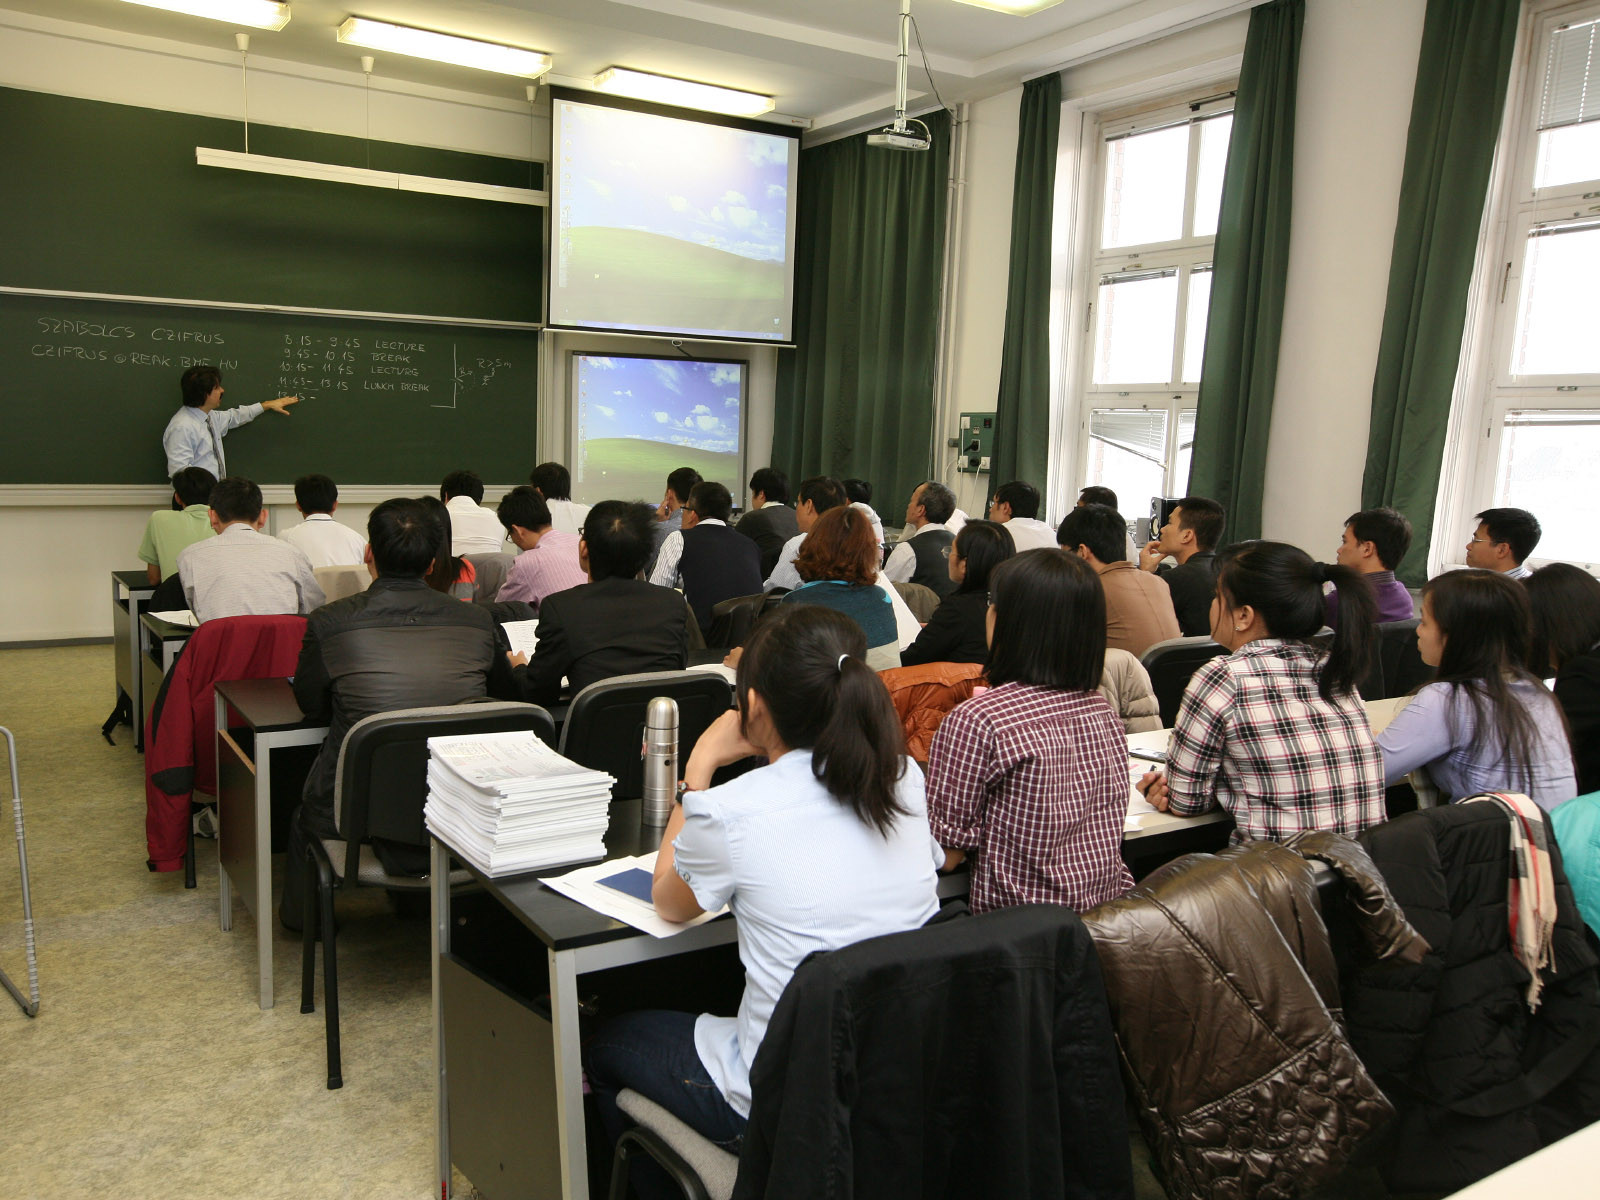 The Institute organizes different training courses in the nuclear field.